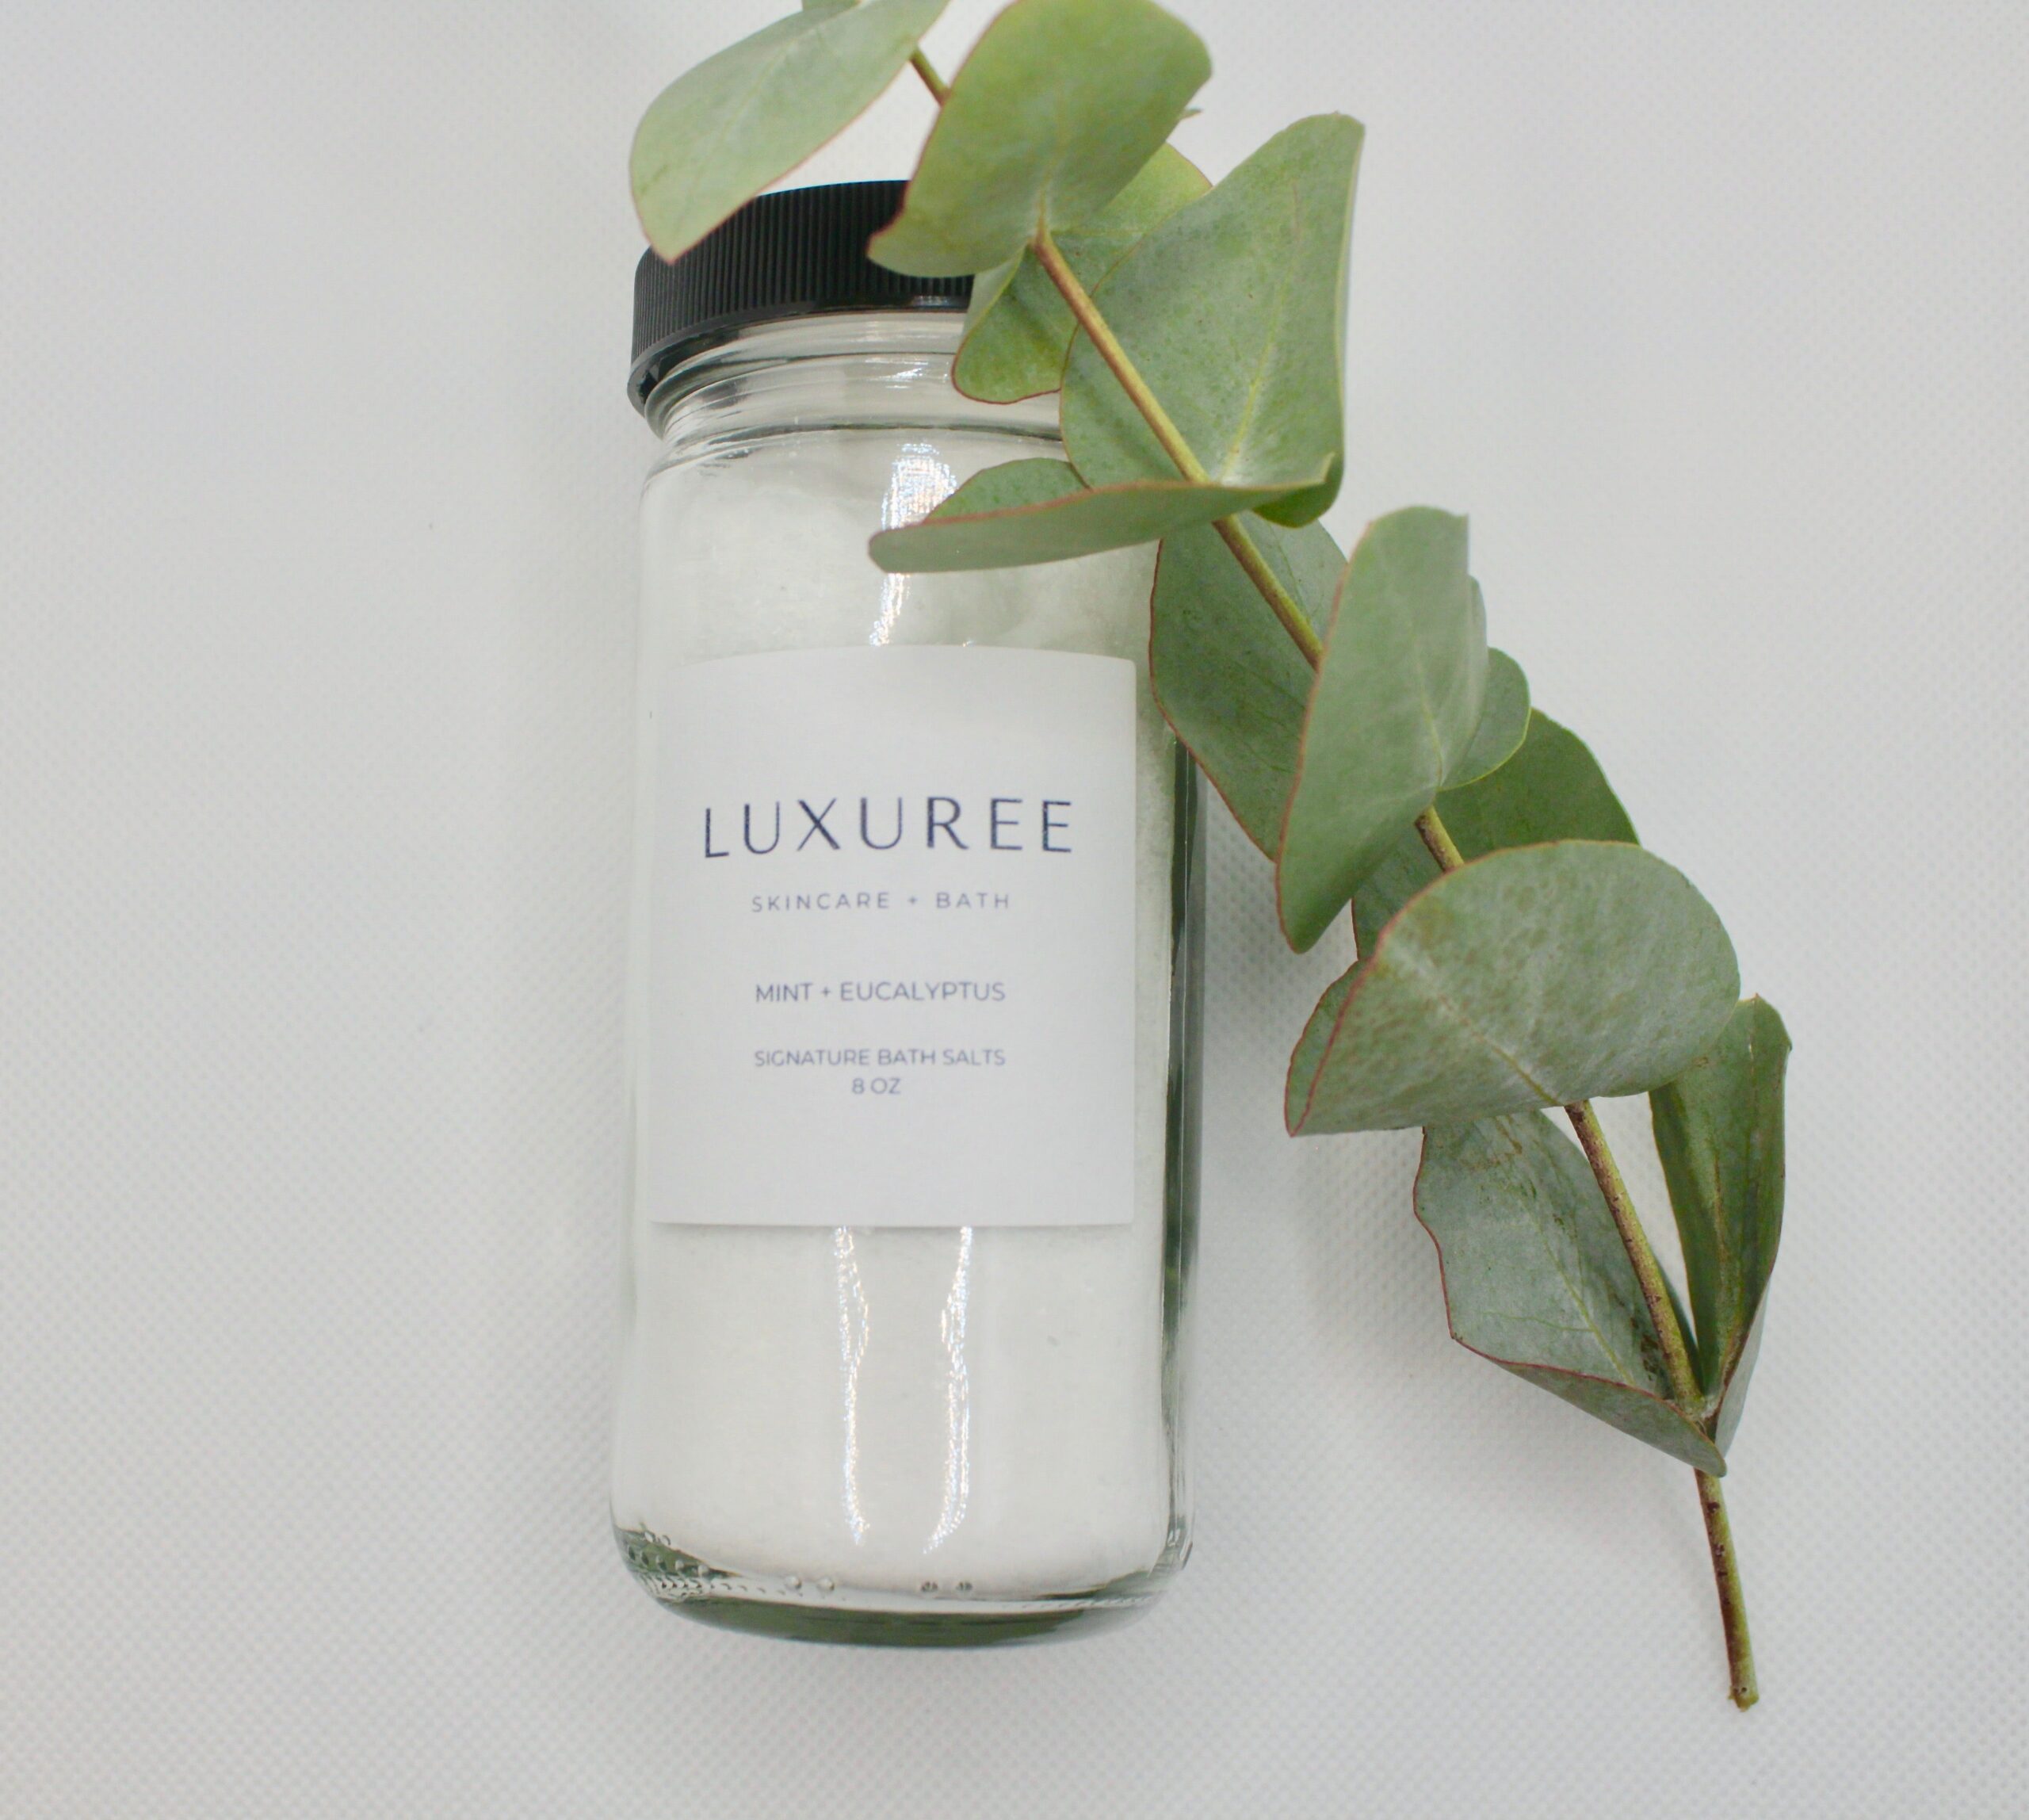 image of Luxuree Skincare and Bath product